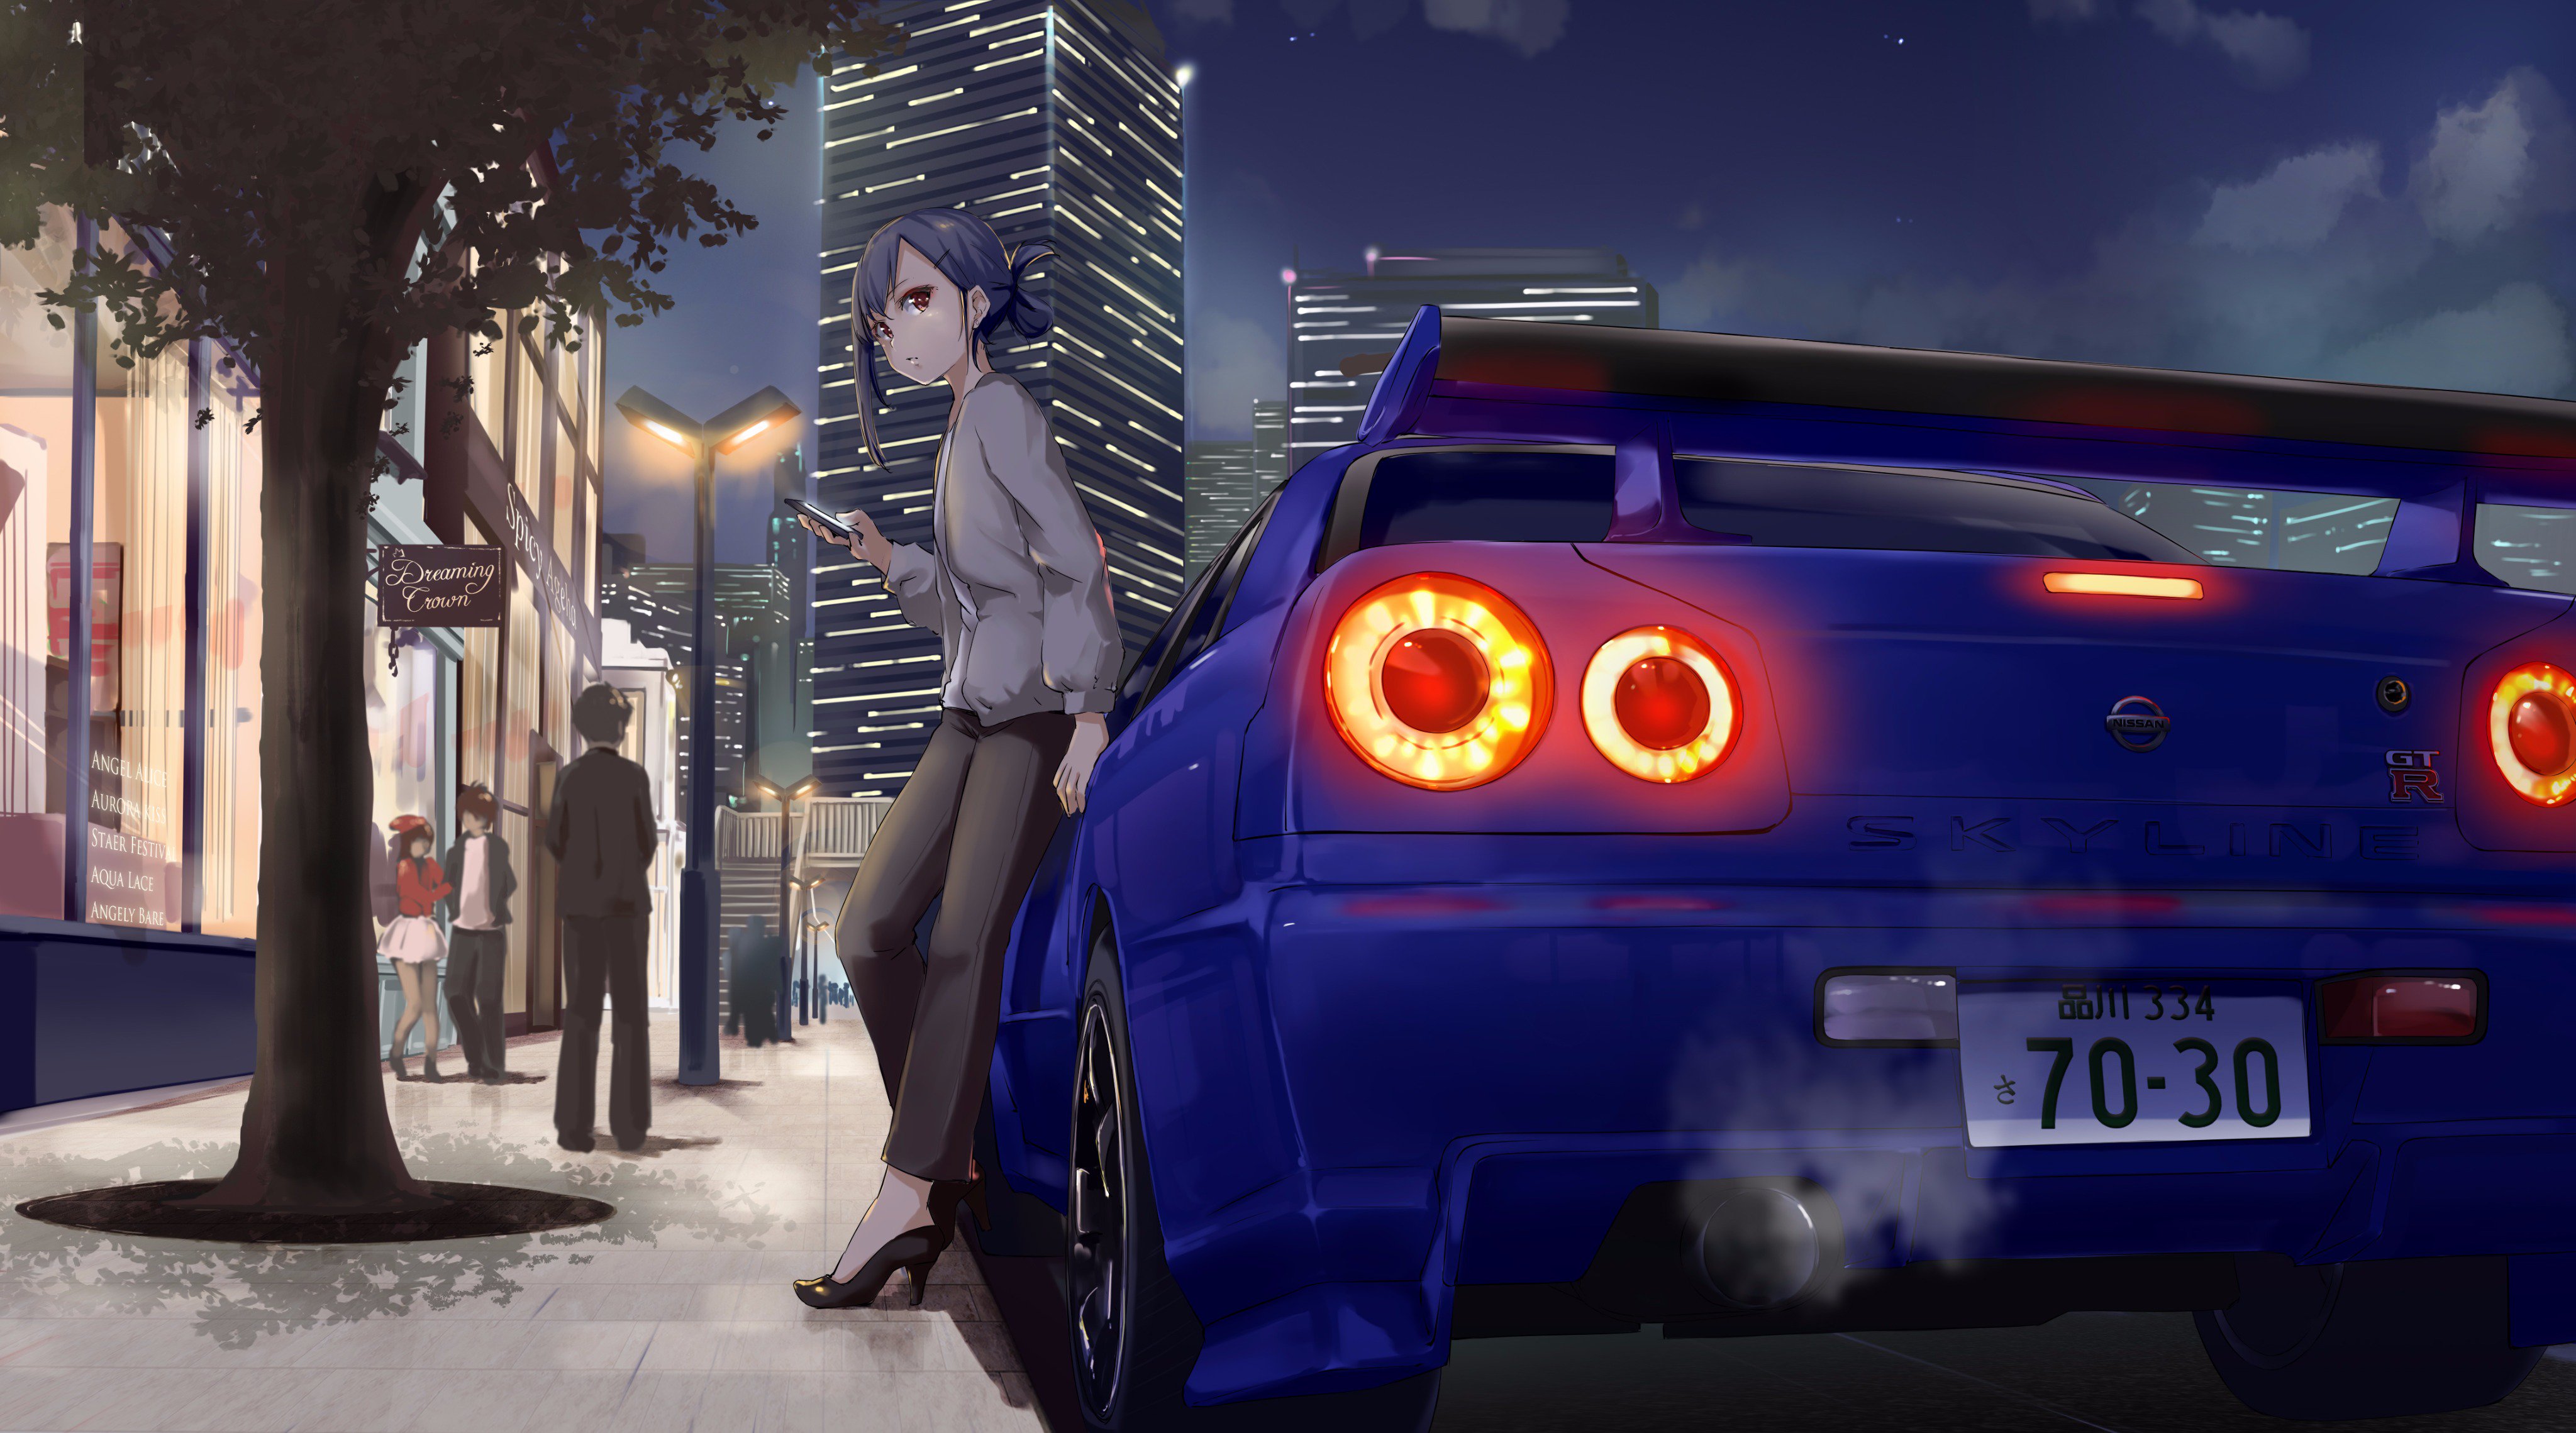 Anime 4096x2279 car anime anime girls tuning engine exhaust exhaust pipes Nissan Nissan Skyline Nissan Skyline R34 women with cars city blue cars vehicle numbers smartphone